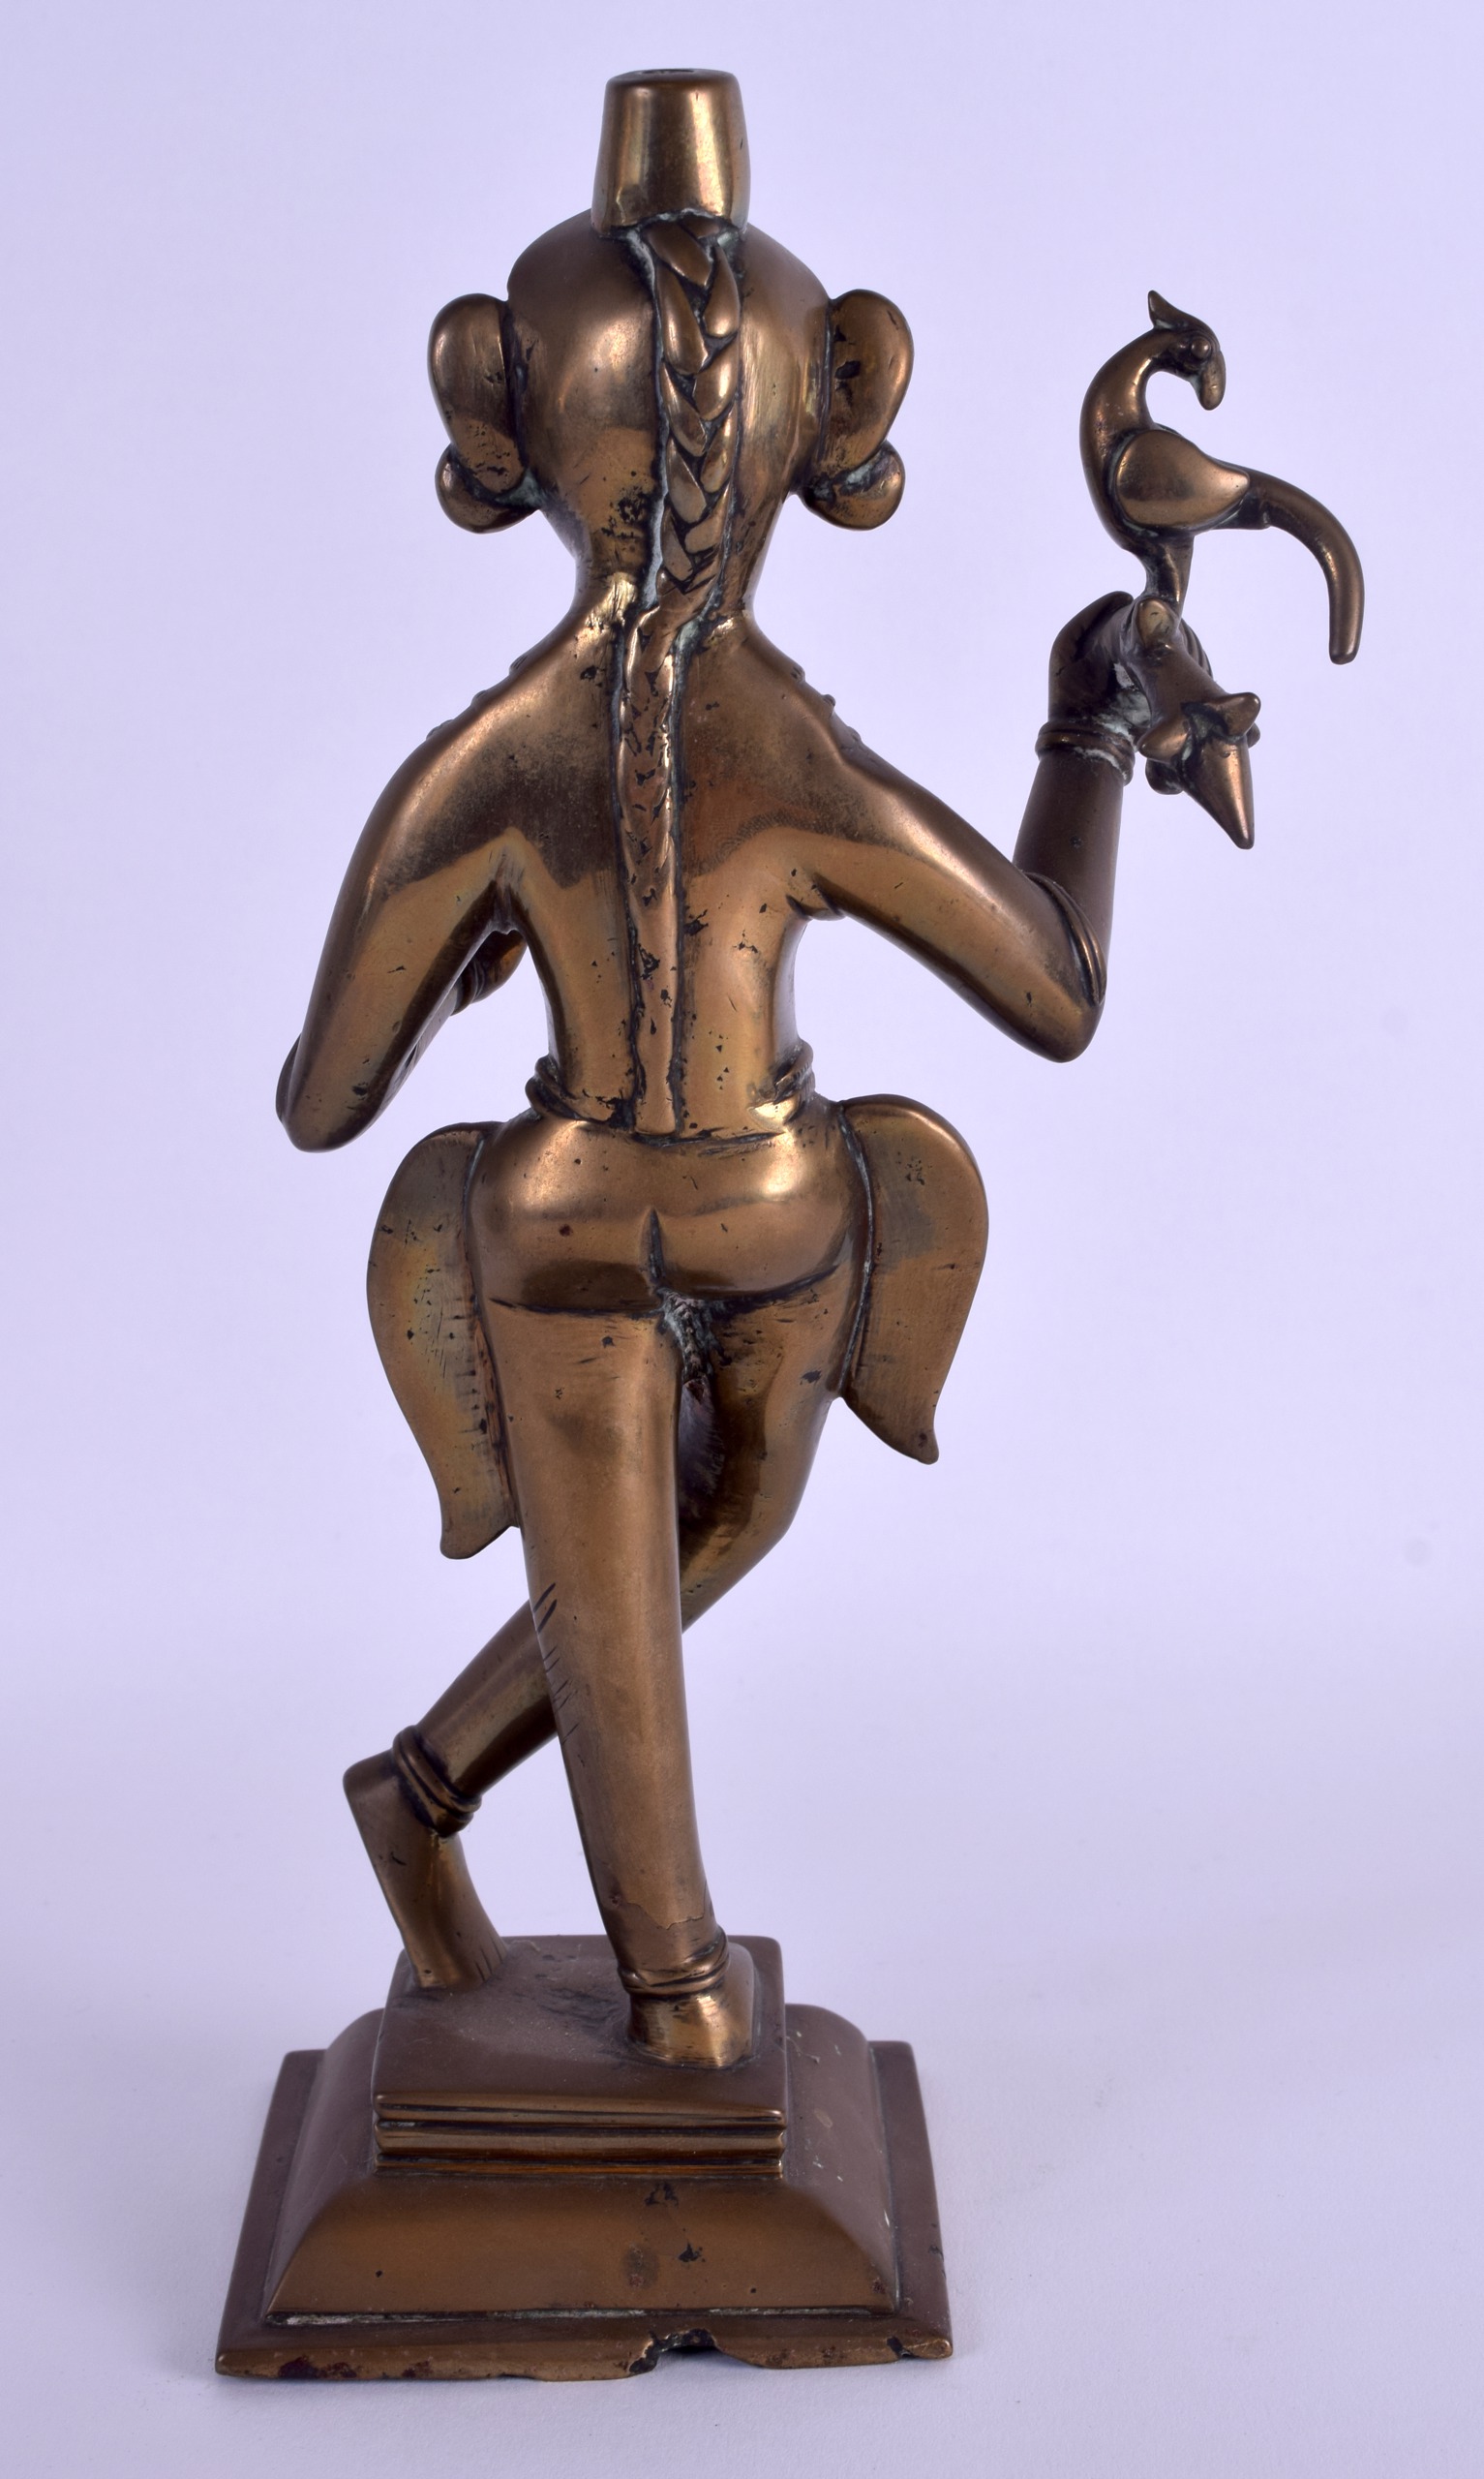 AN 18TH CENTURY INDIAN BRONZE FIGURE OF A STANDING DEITY modelled holding a Buddhistic ritual vessel - Image 2 of 3